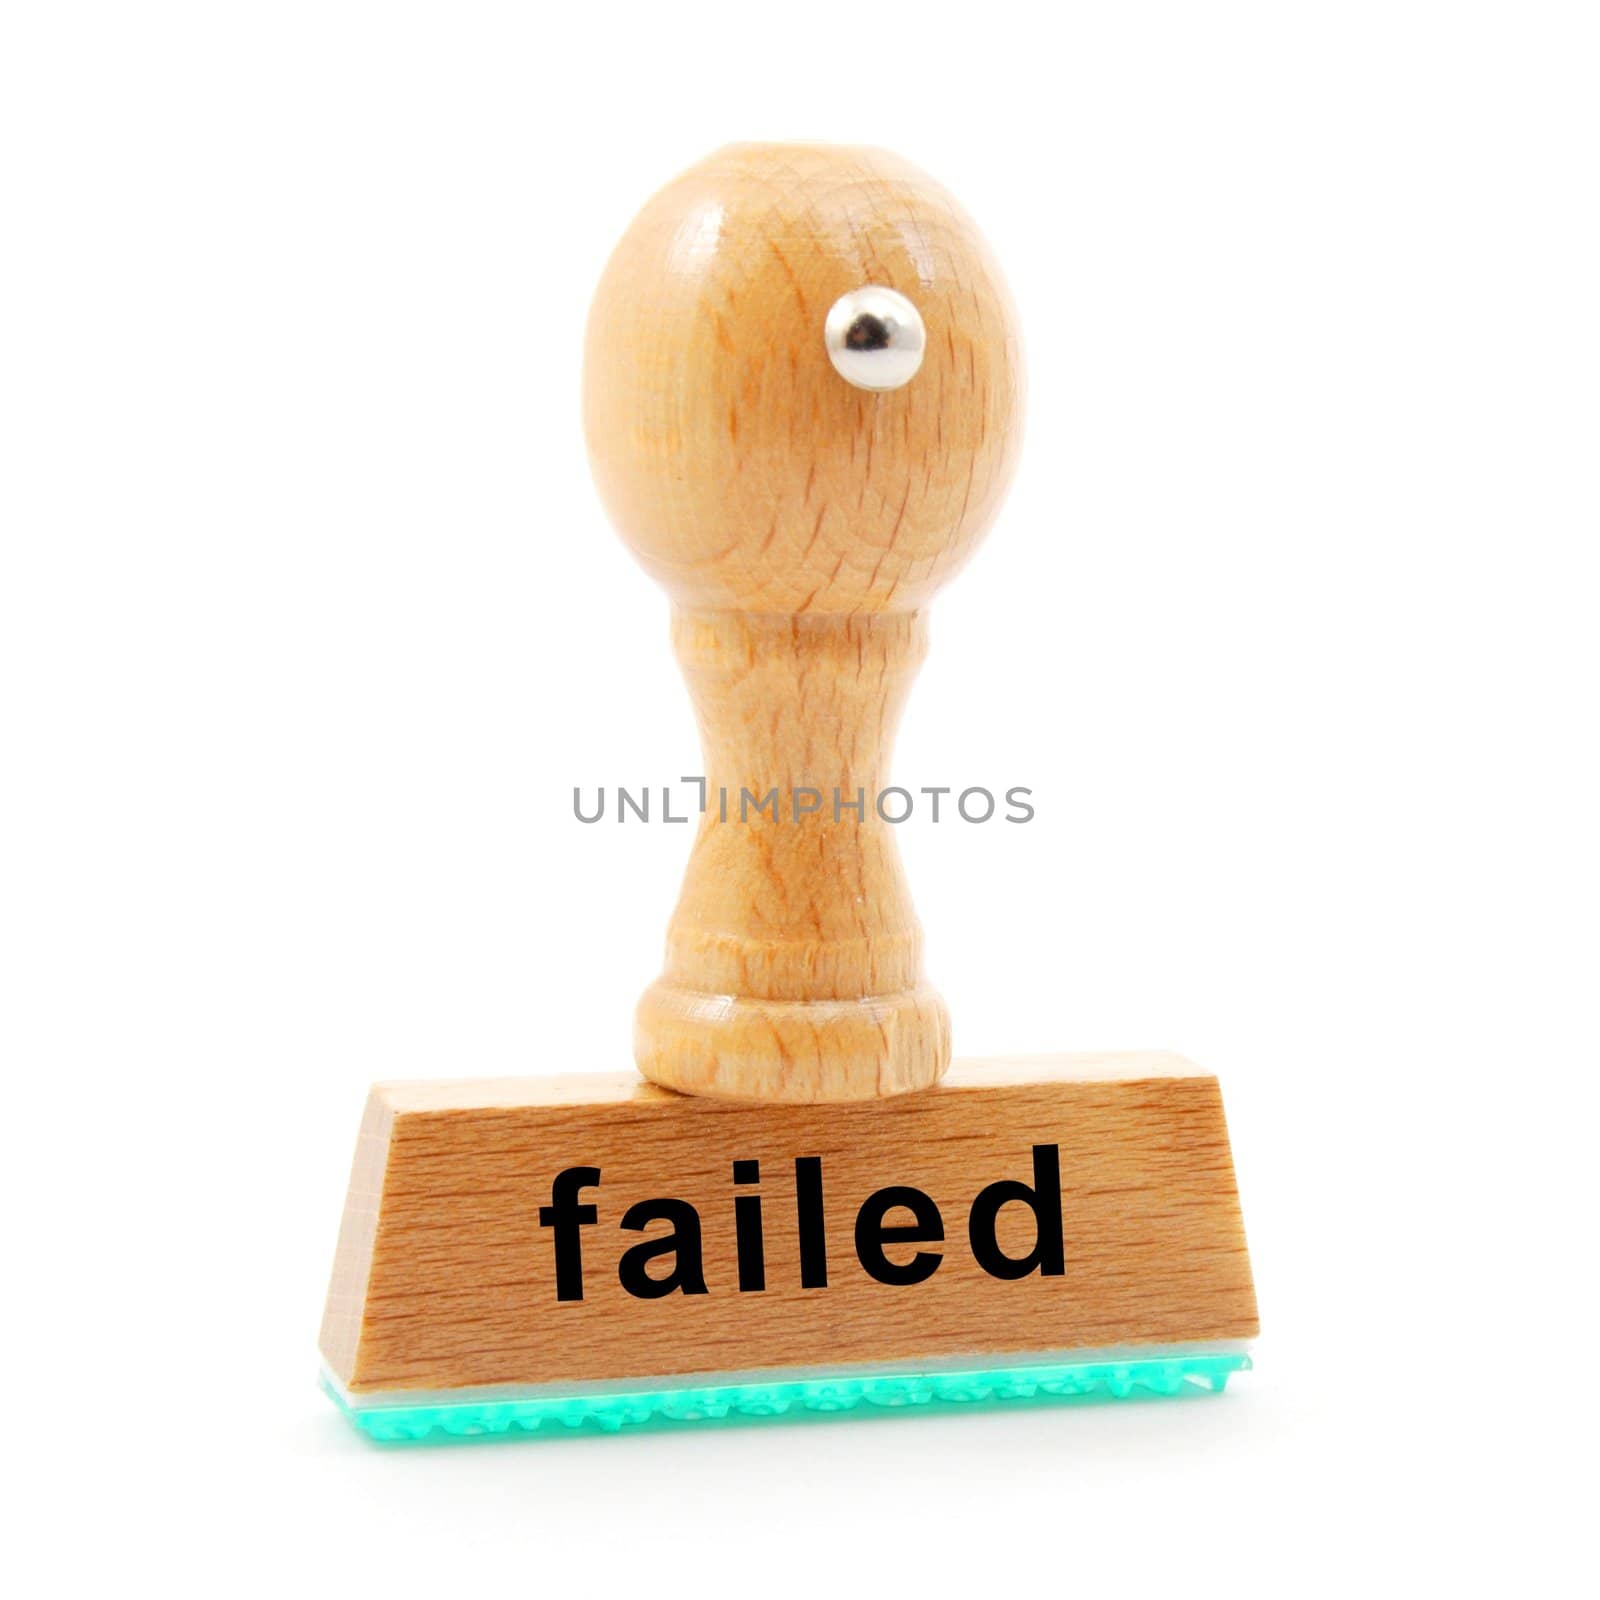 failed stamp in office showing failure concept with copyspace